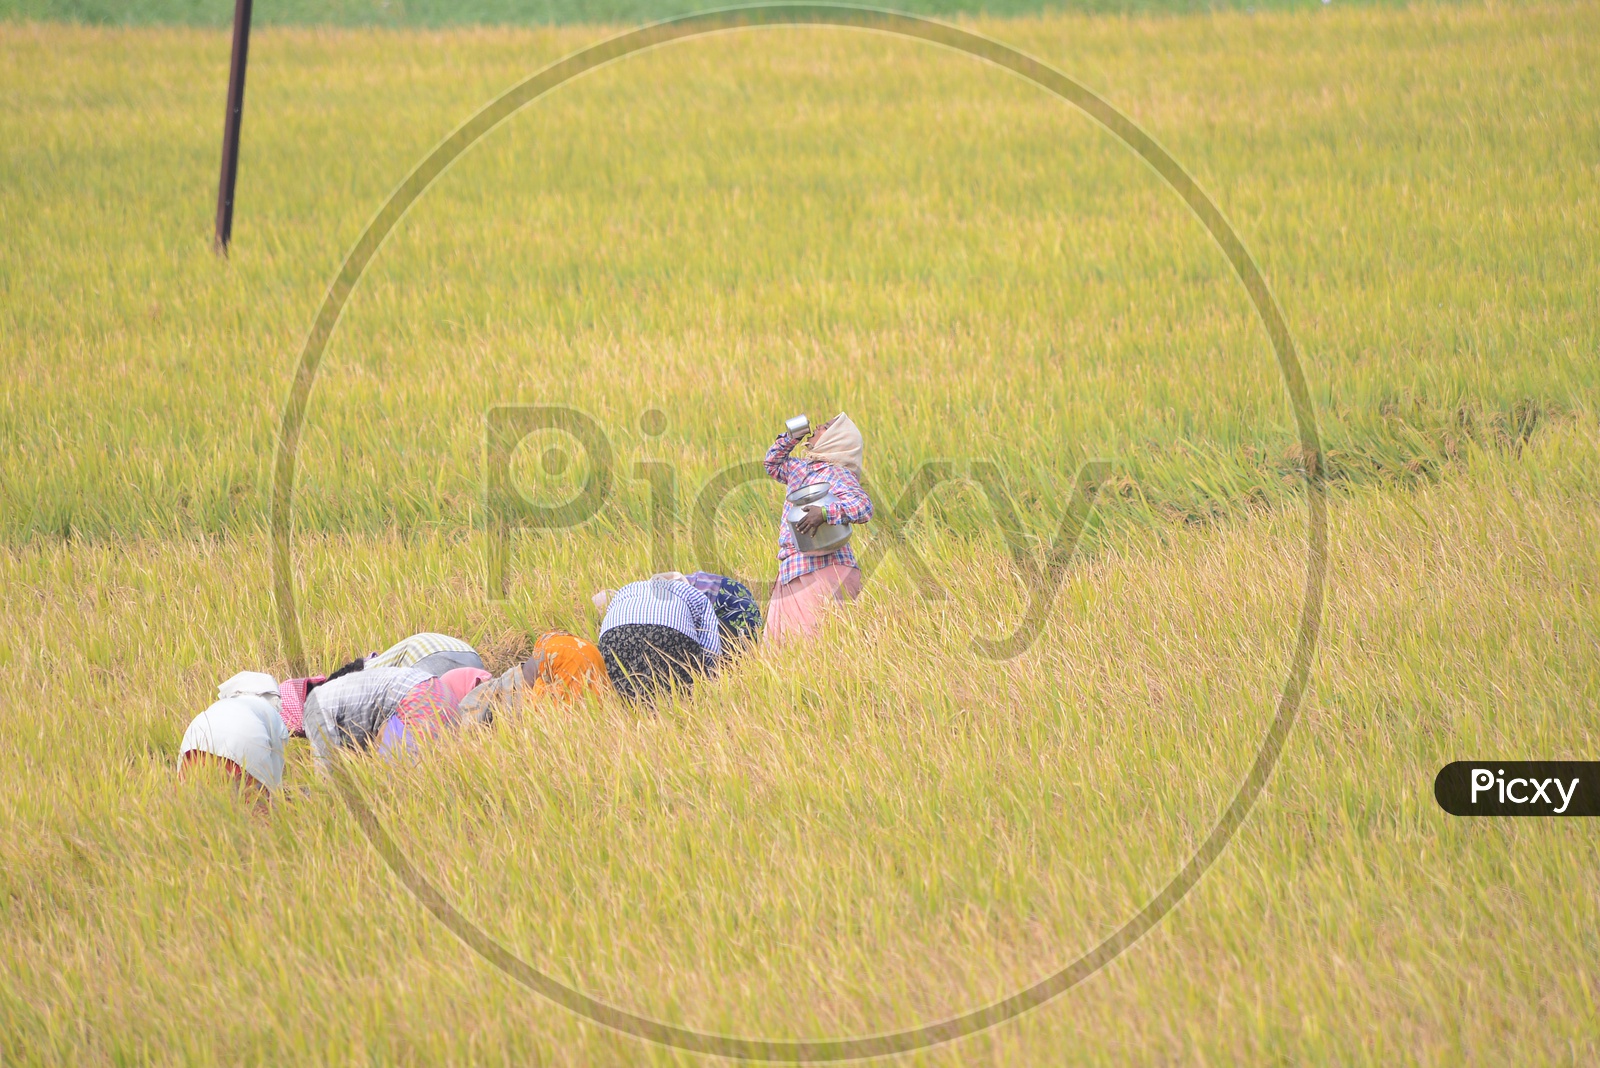 Paddy Fields - Women at Agriculture Work